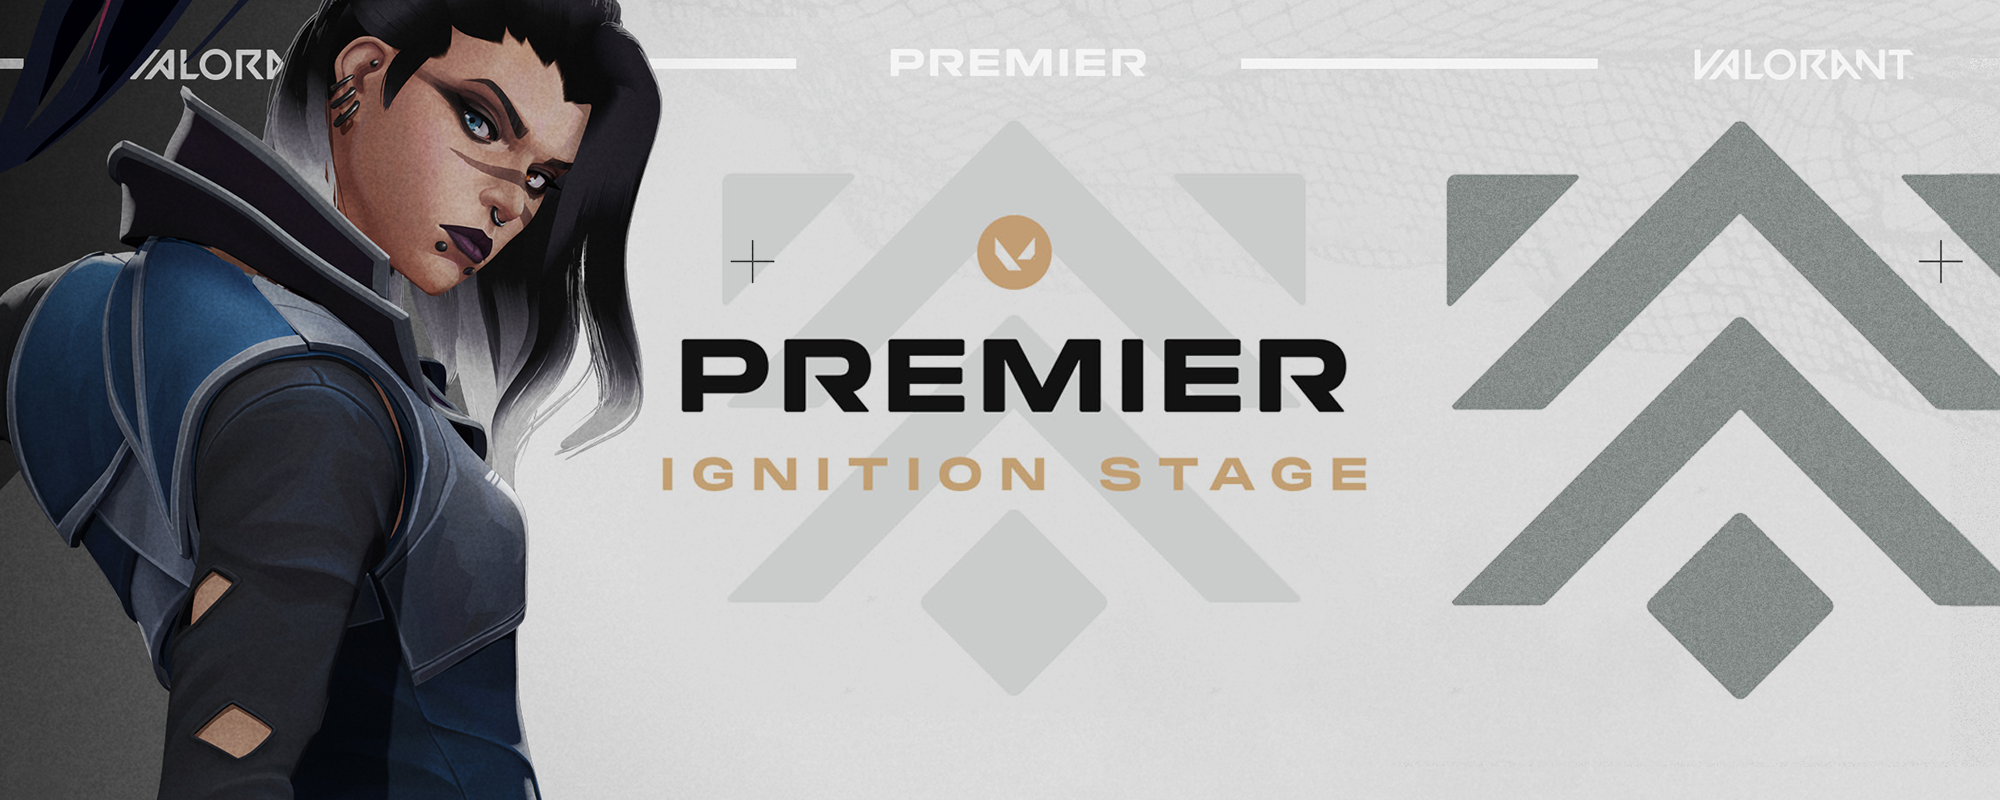 Premier Ignition Stage - Time to find your team!